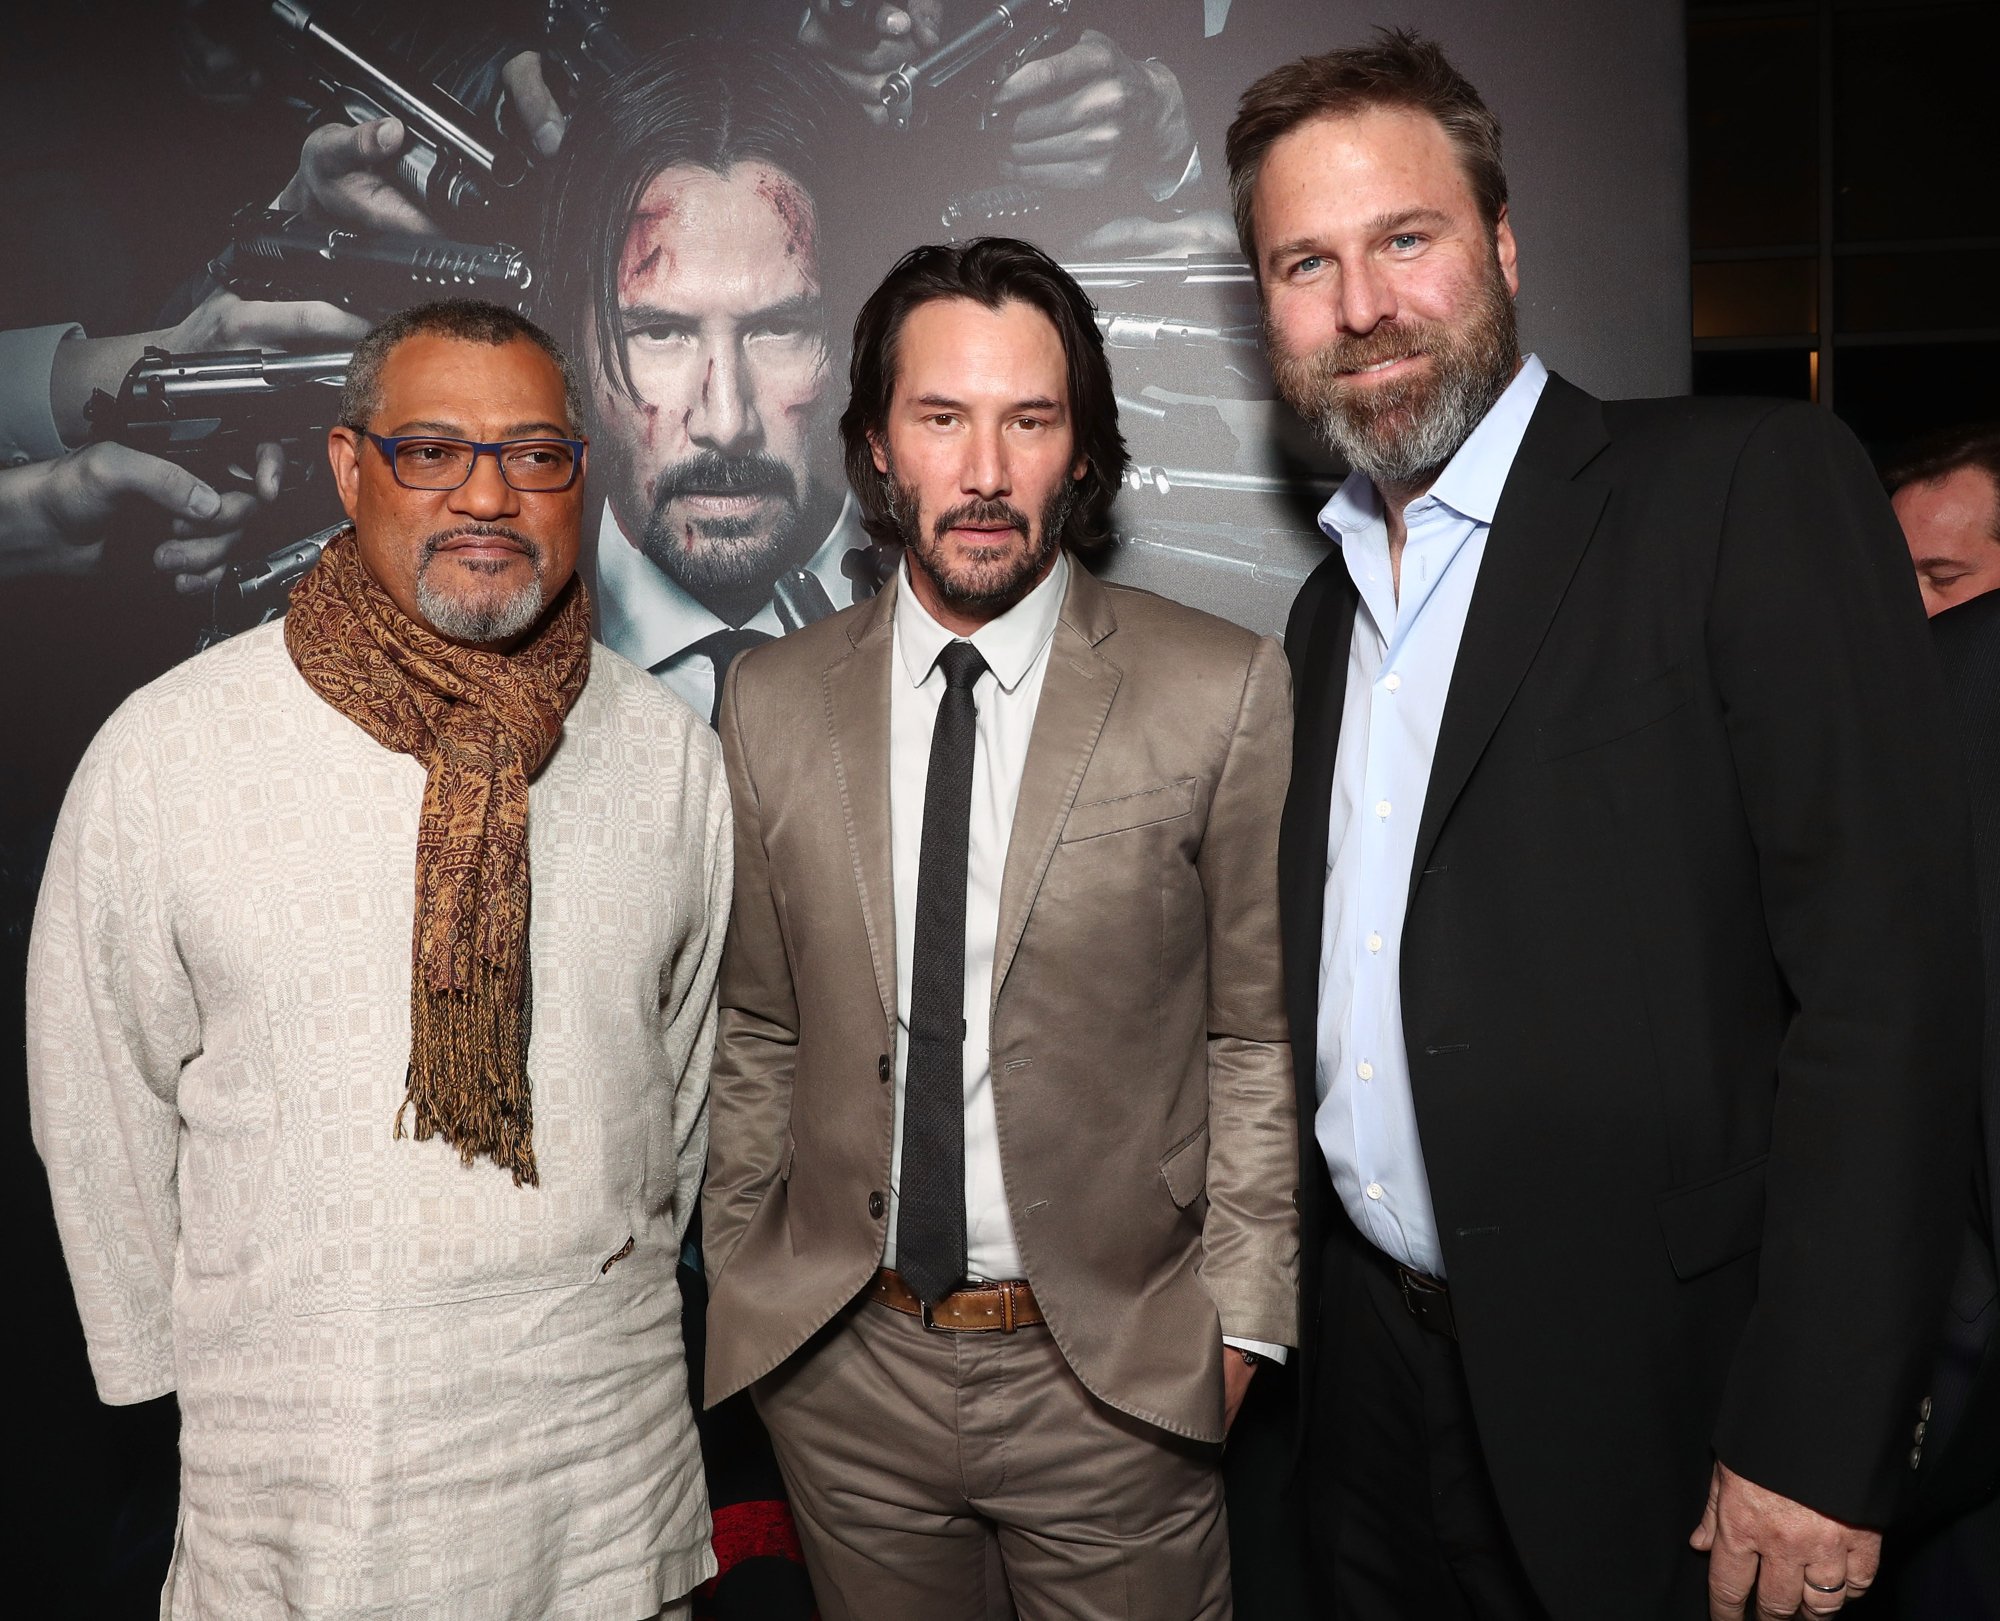 John Wick 5: Release, Cast, and Everything You Need to Know